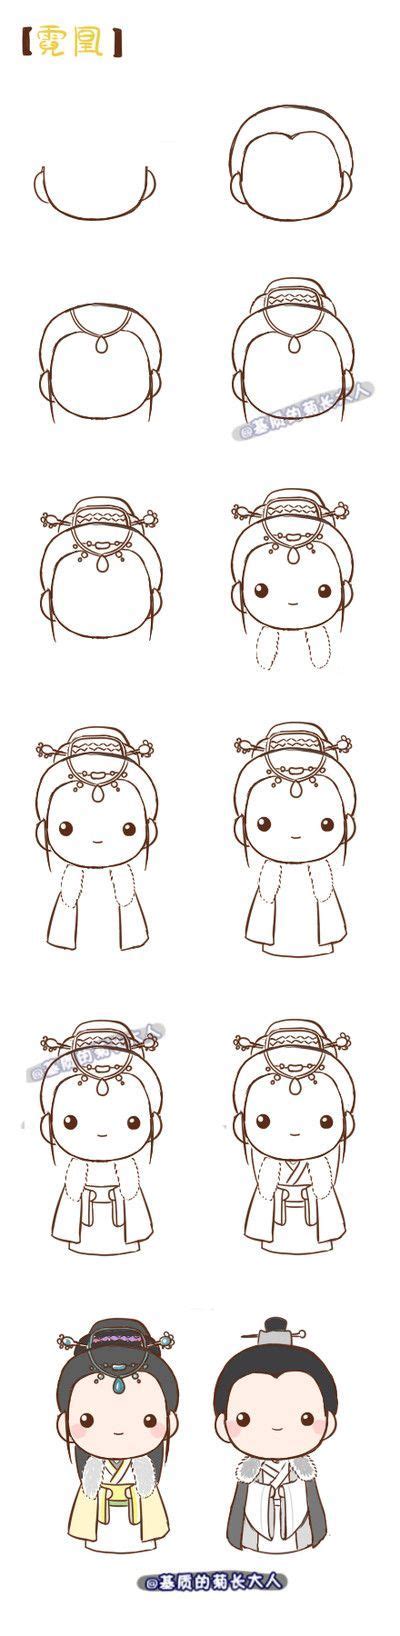 How To Draw A Chibi Step By Step Pictures Cool2bkids